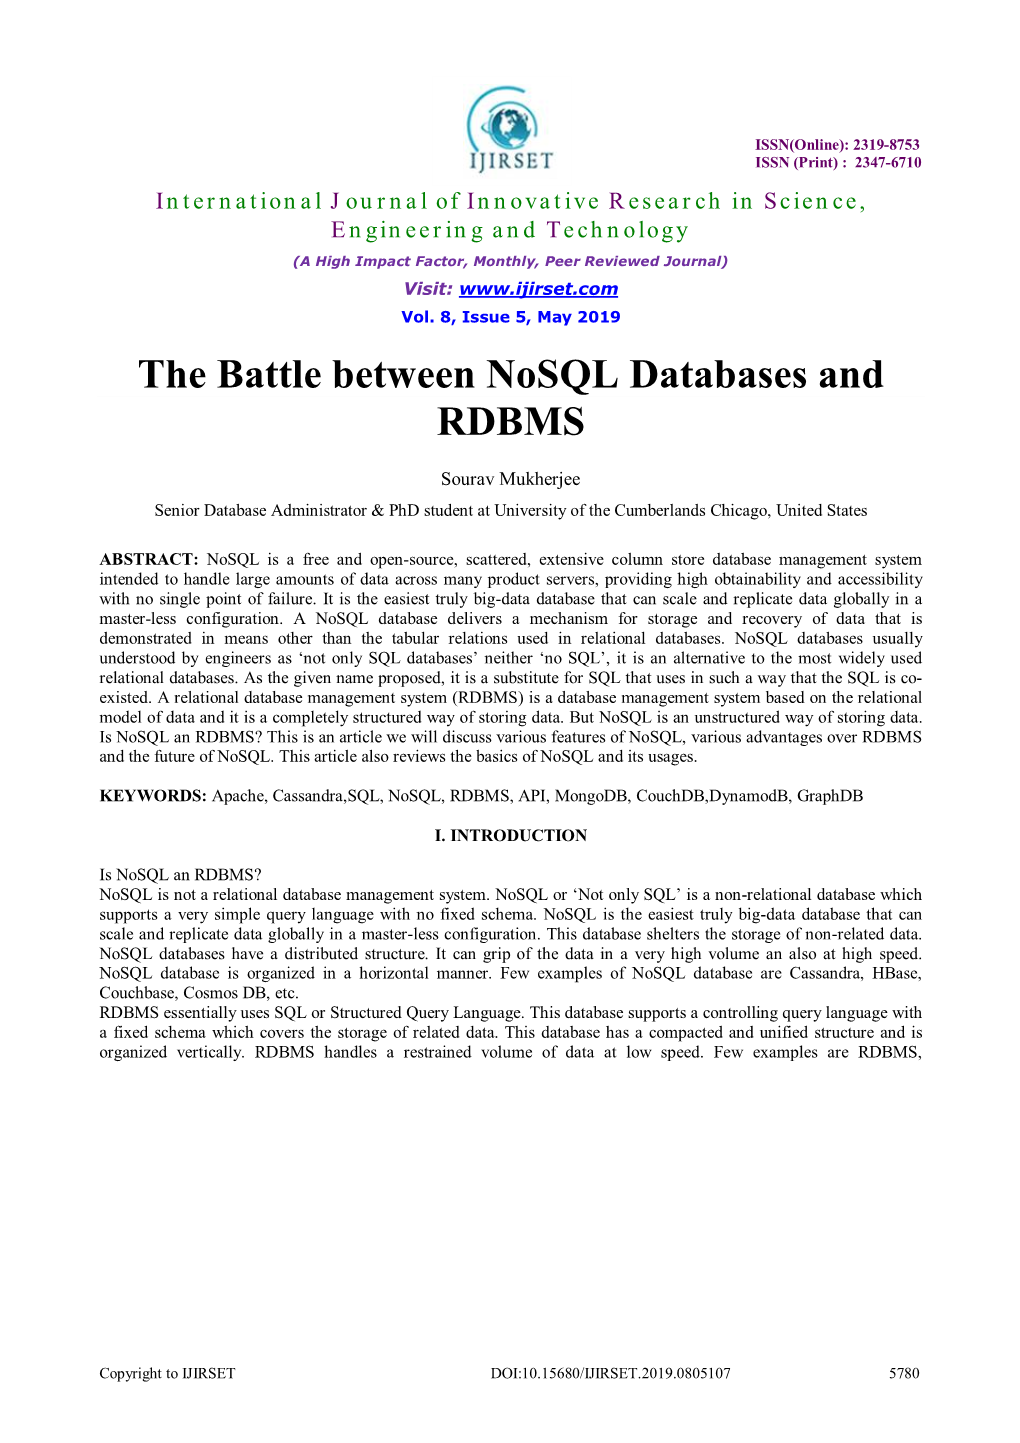 The Battle Between Nosql Databases and RDBMS